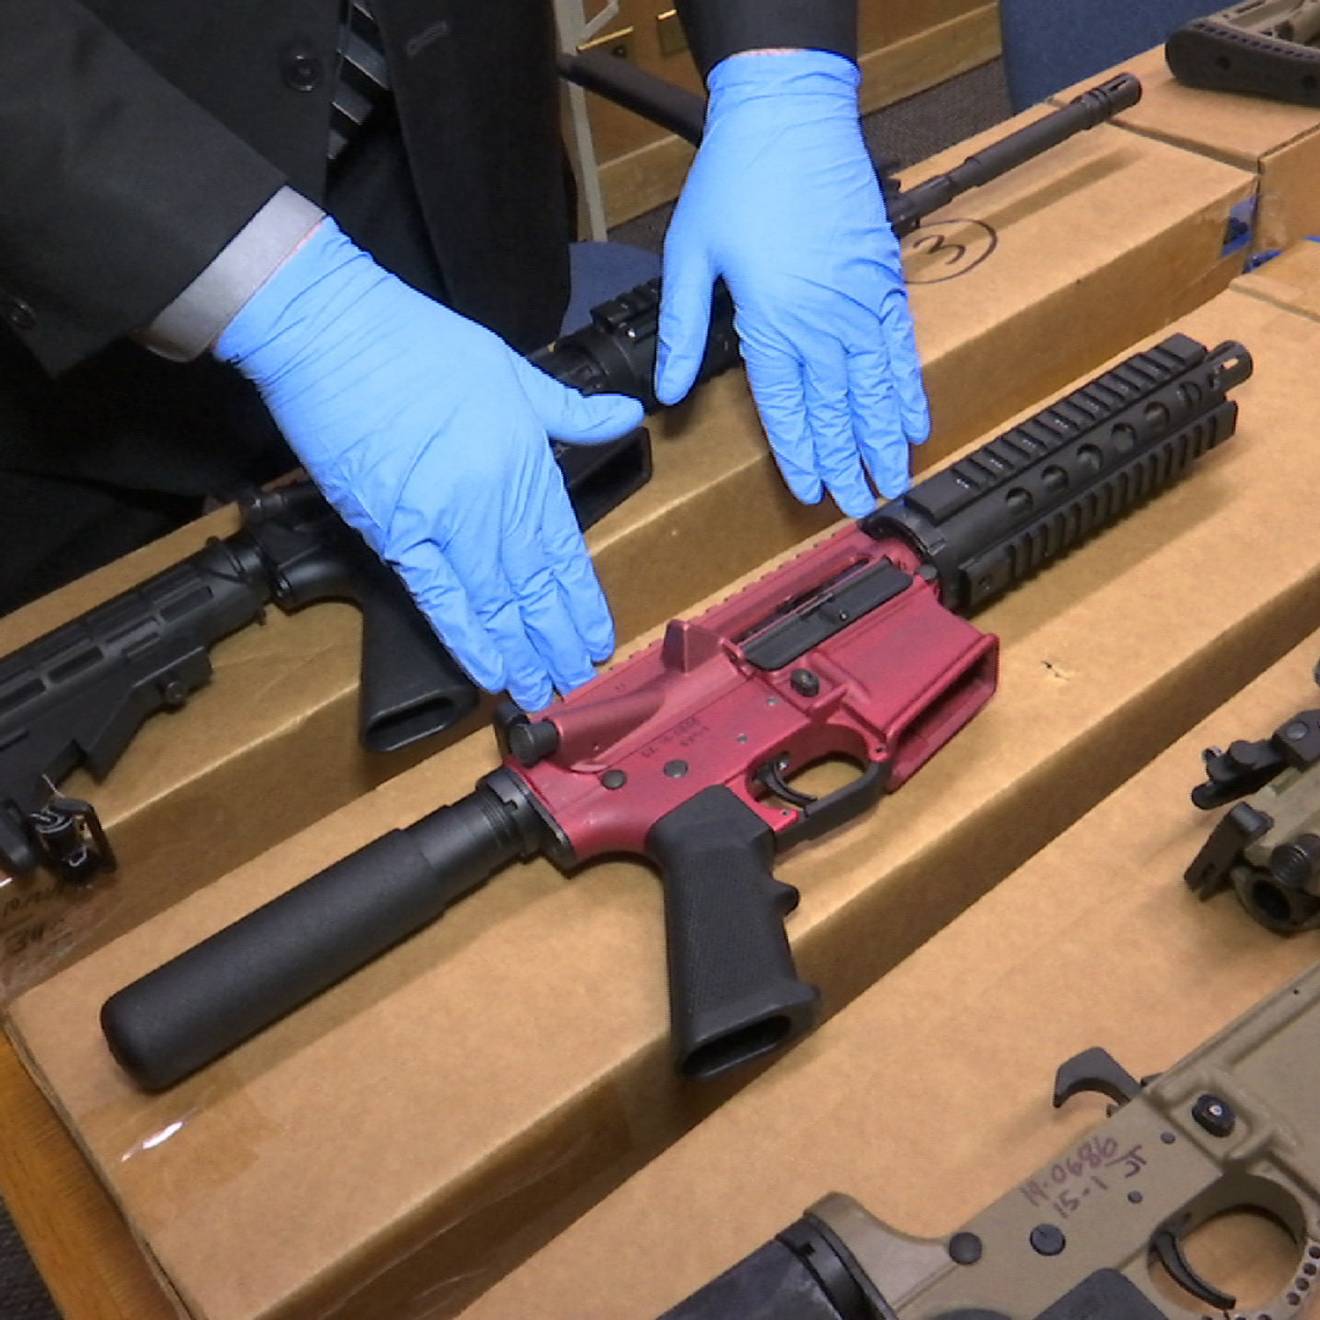 A San Franciso police officer displays several ‘ghost guns’ – untraceable firearms with no serial numbers or manufacturing marks. 